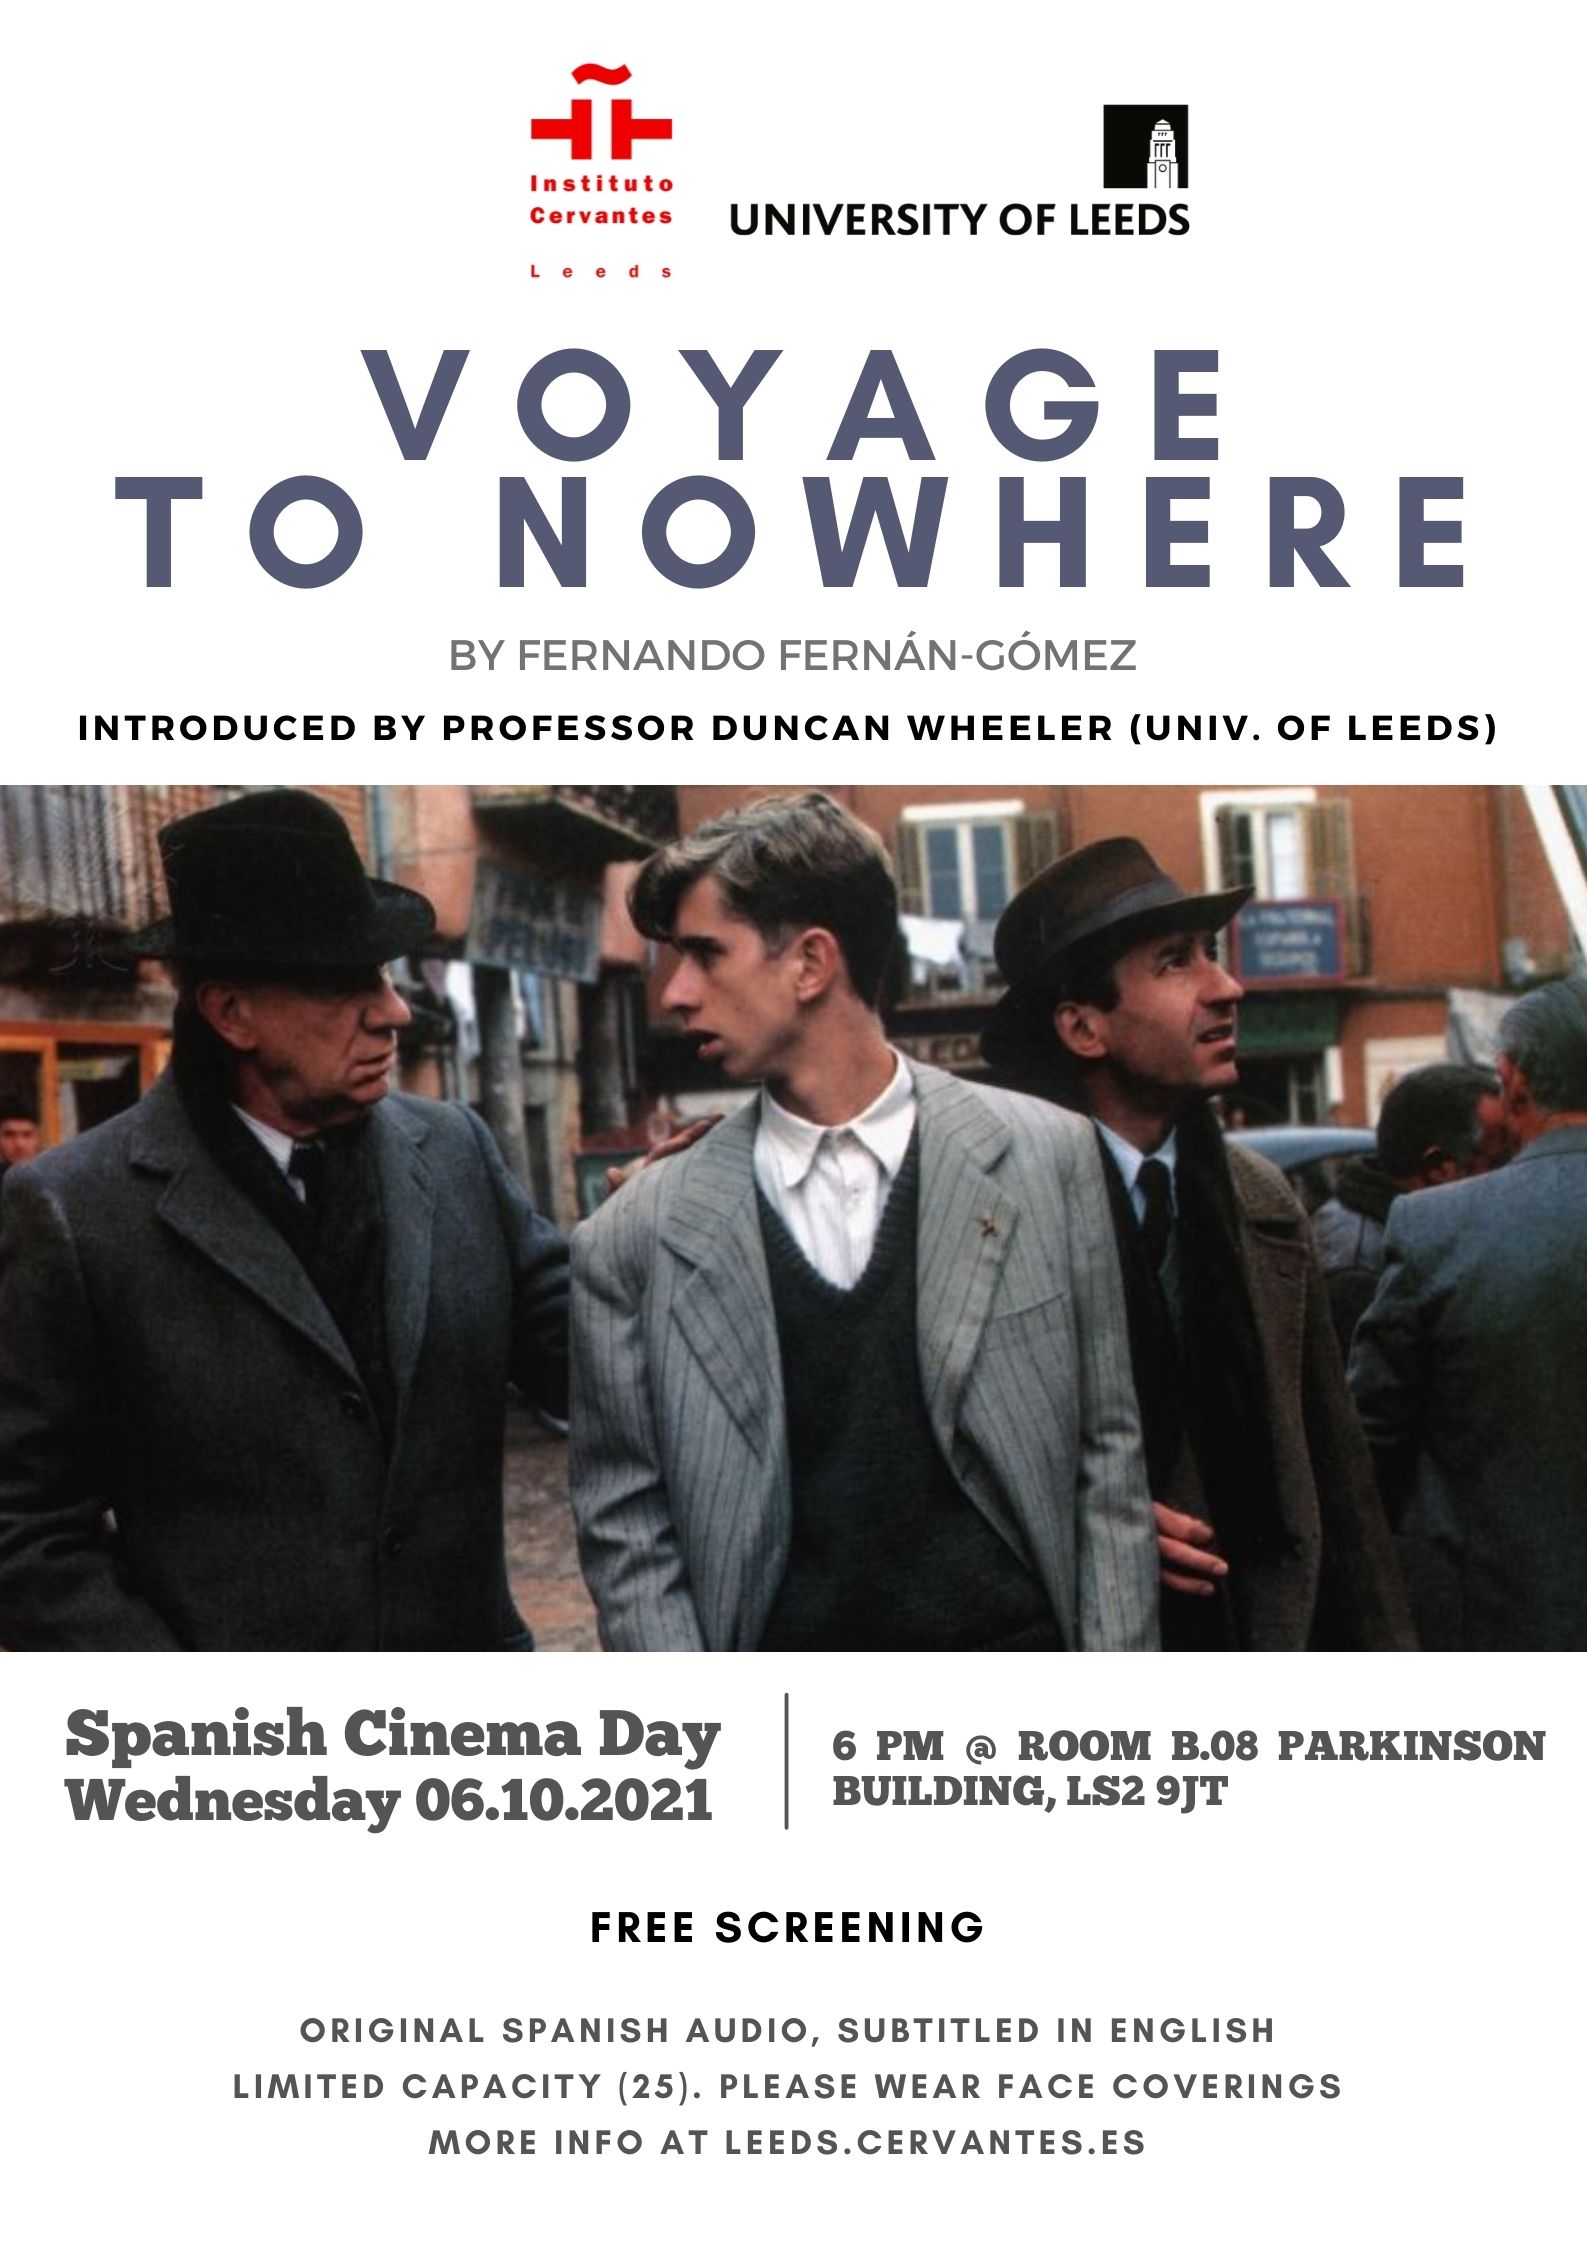 Spanish Cinema Day: Voyage to Nowhere, introduced by Duncan Wheeler